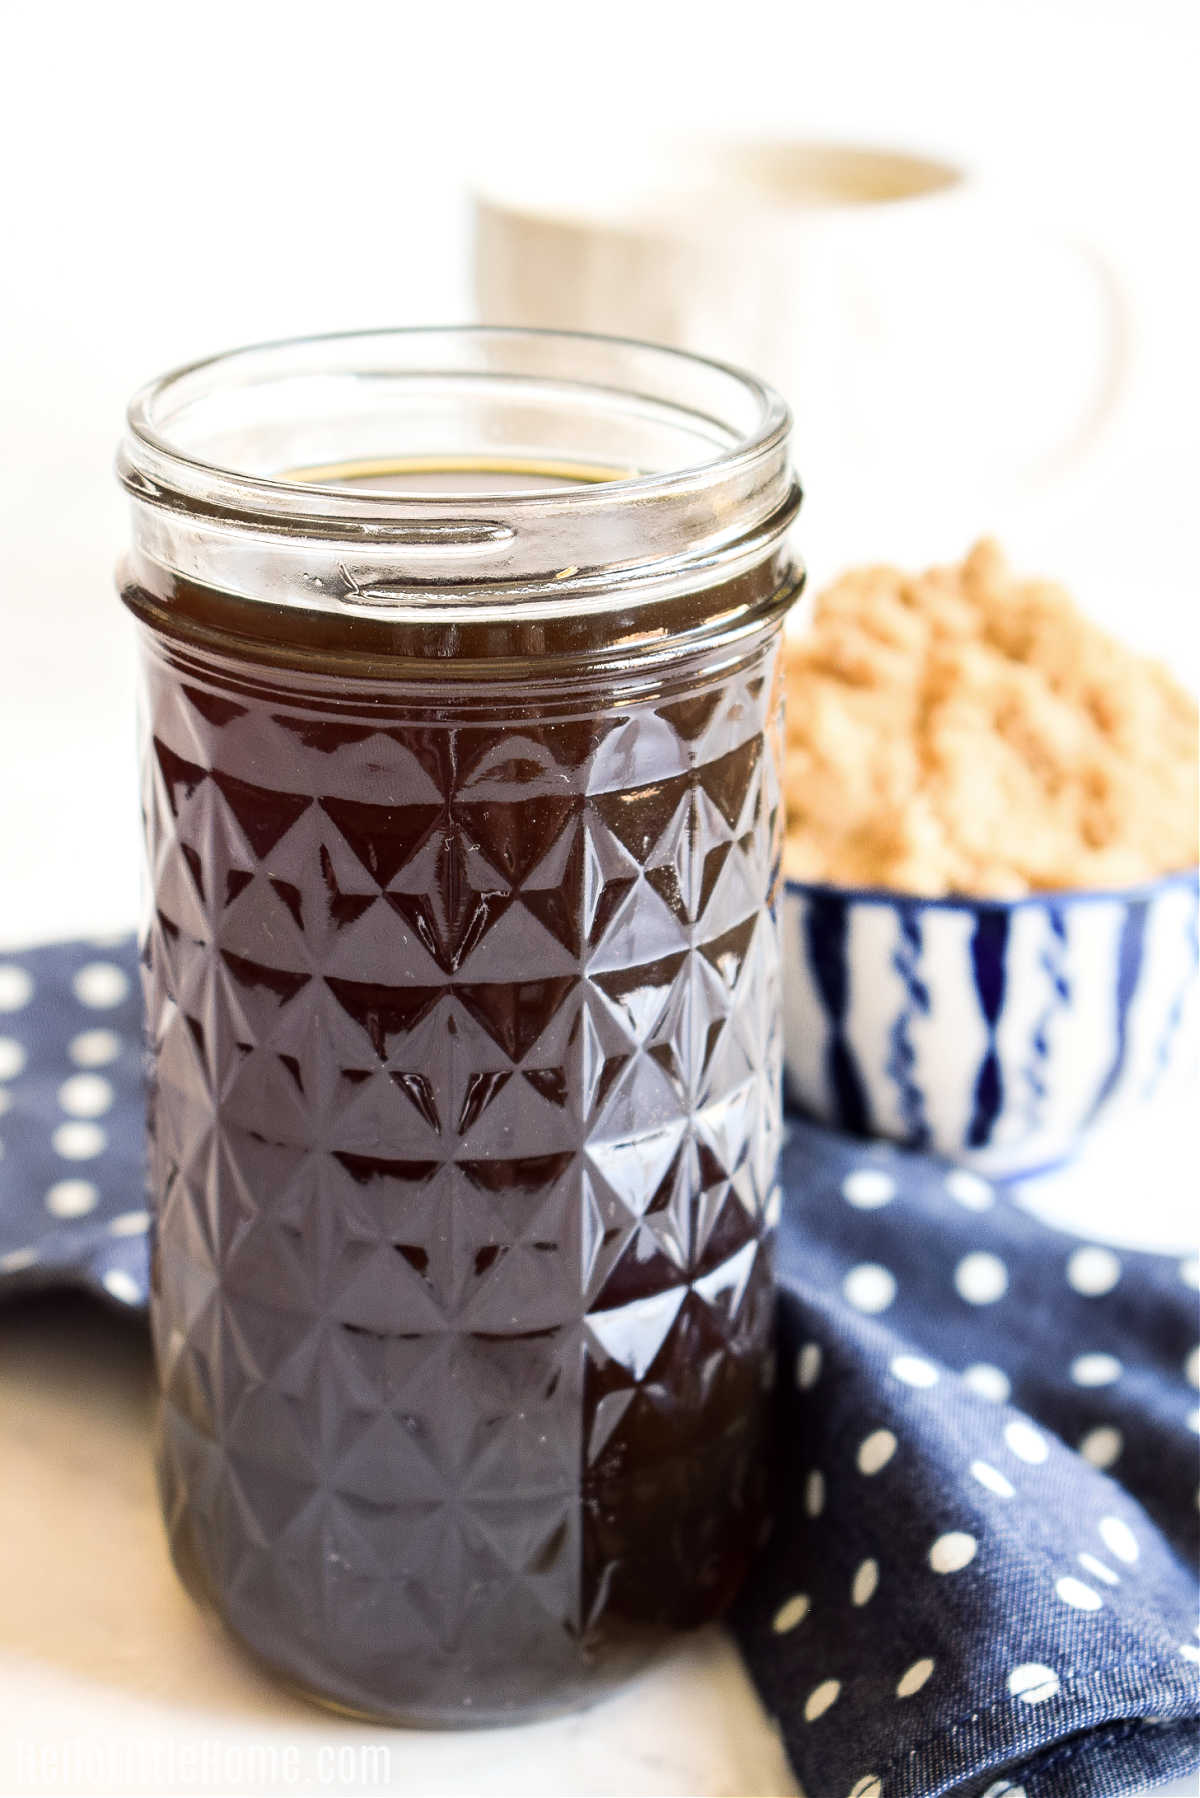 A jar of the finished syrup with a napkin, bowl of brown sugar, and mug in the background.